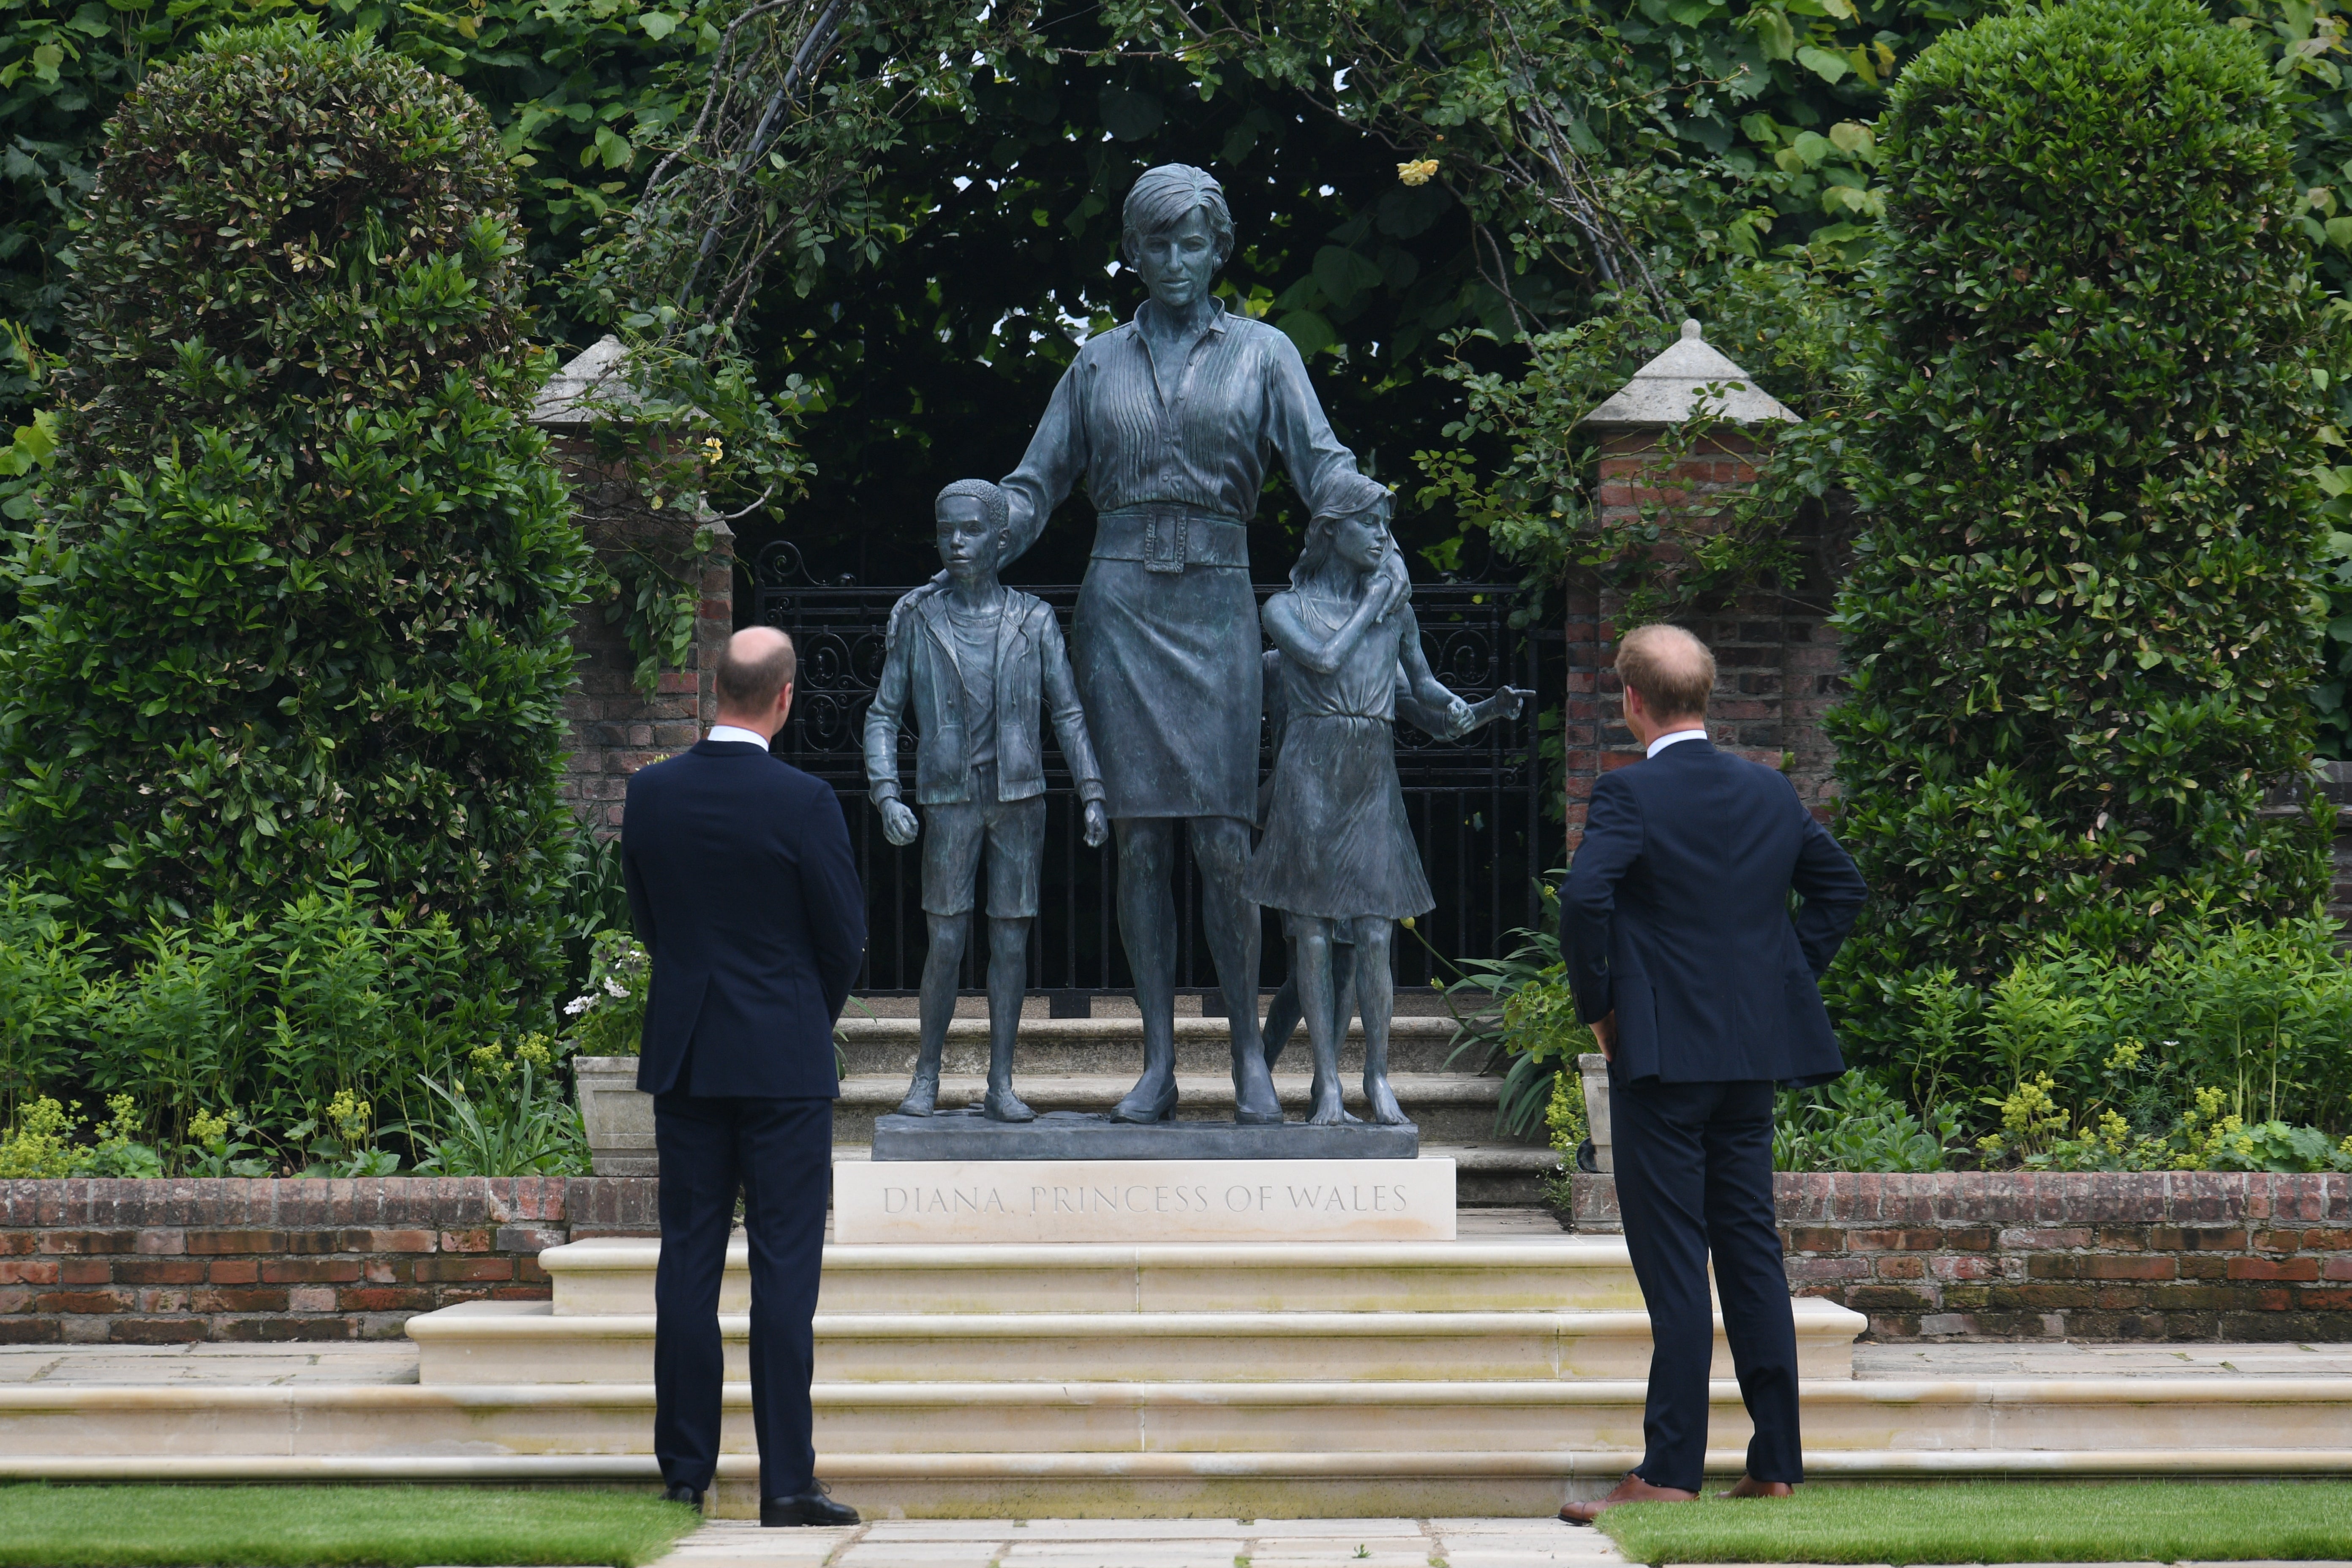 The Duke of Cambridge (left) and Duke of Sussex were reunited for an event commemorating their mother last year